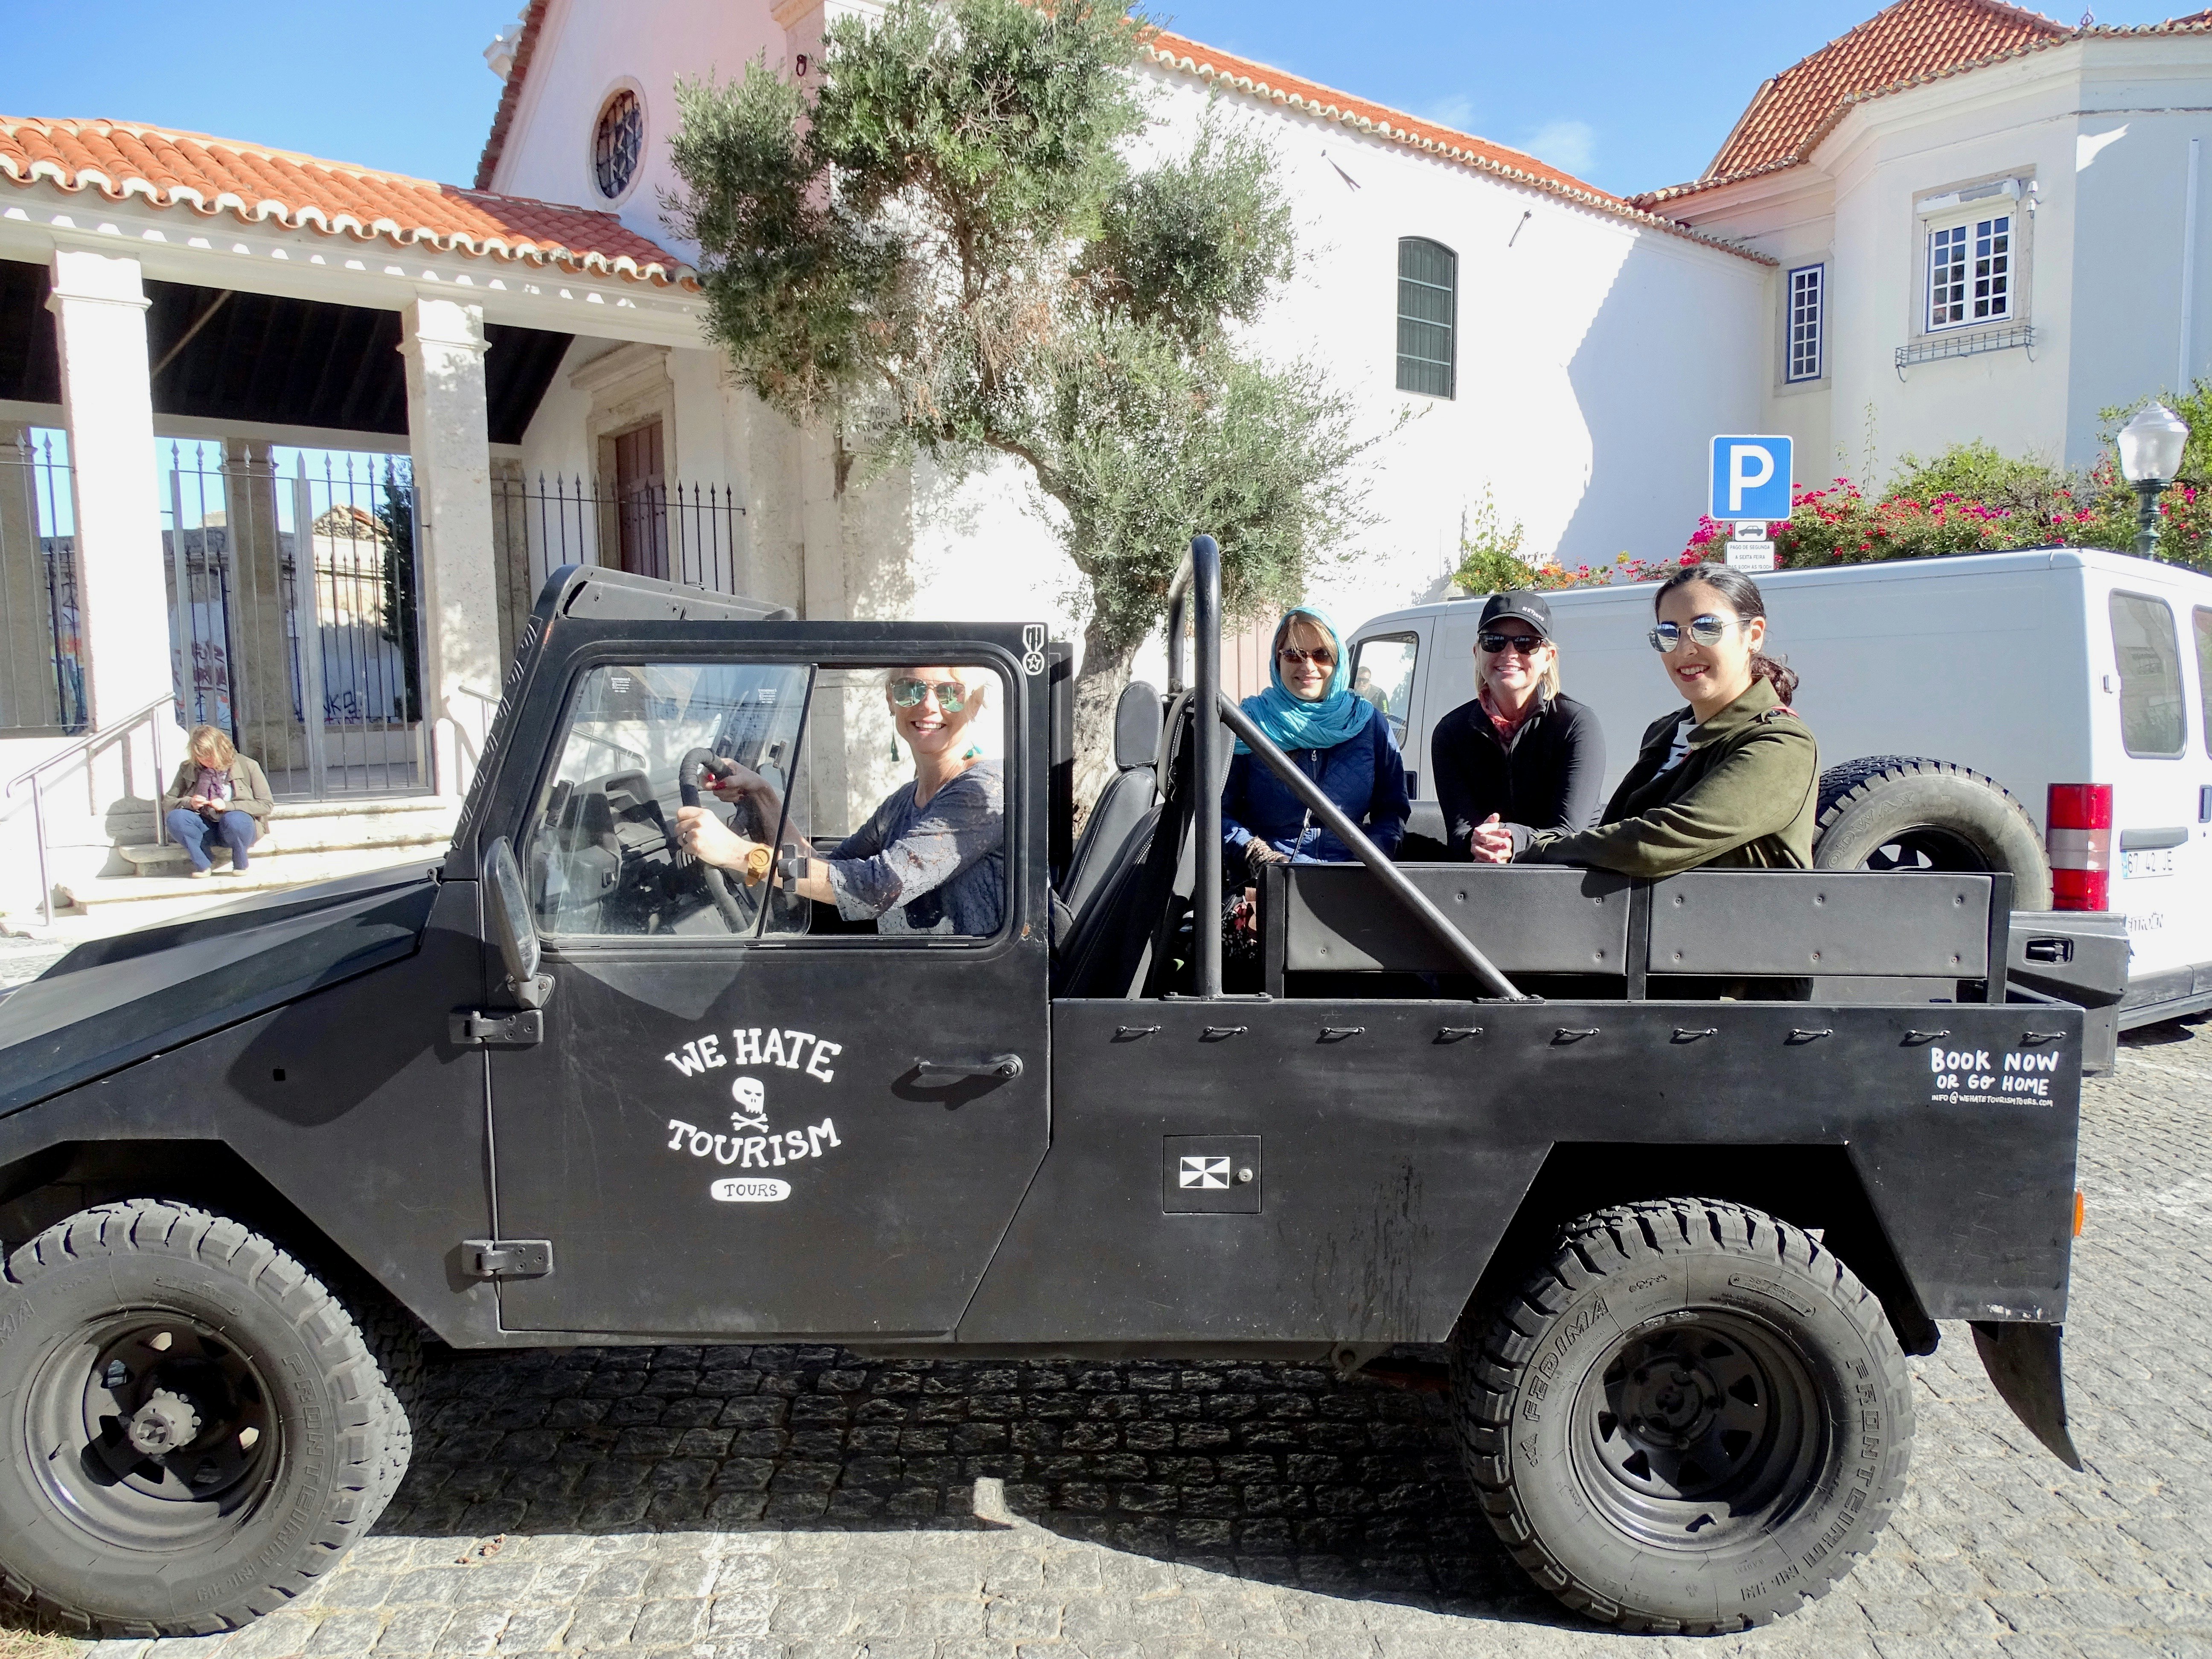 A black open-top jeep in Lisbon with "We Hate Tourism" stamped on the side.